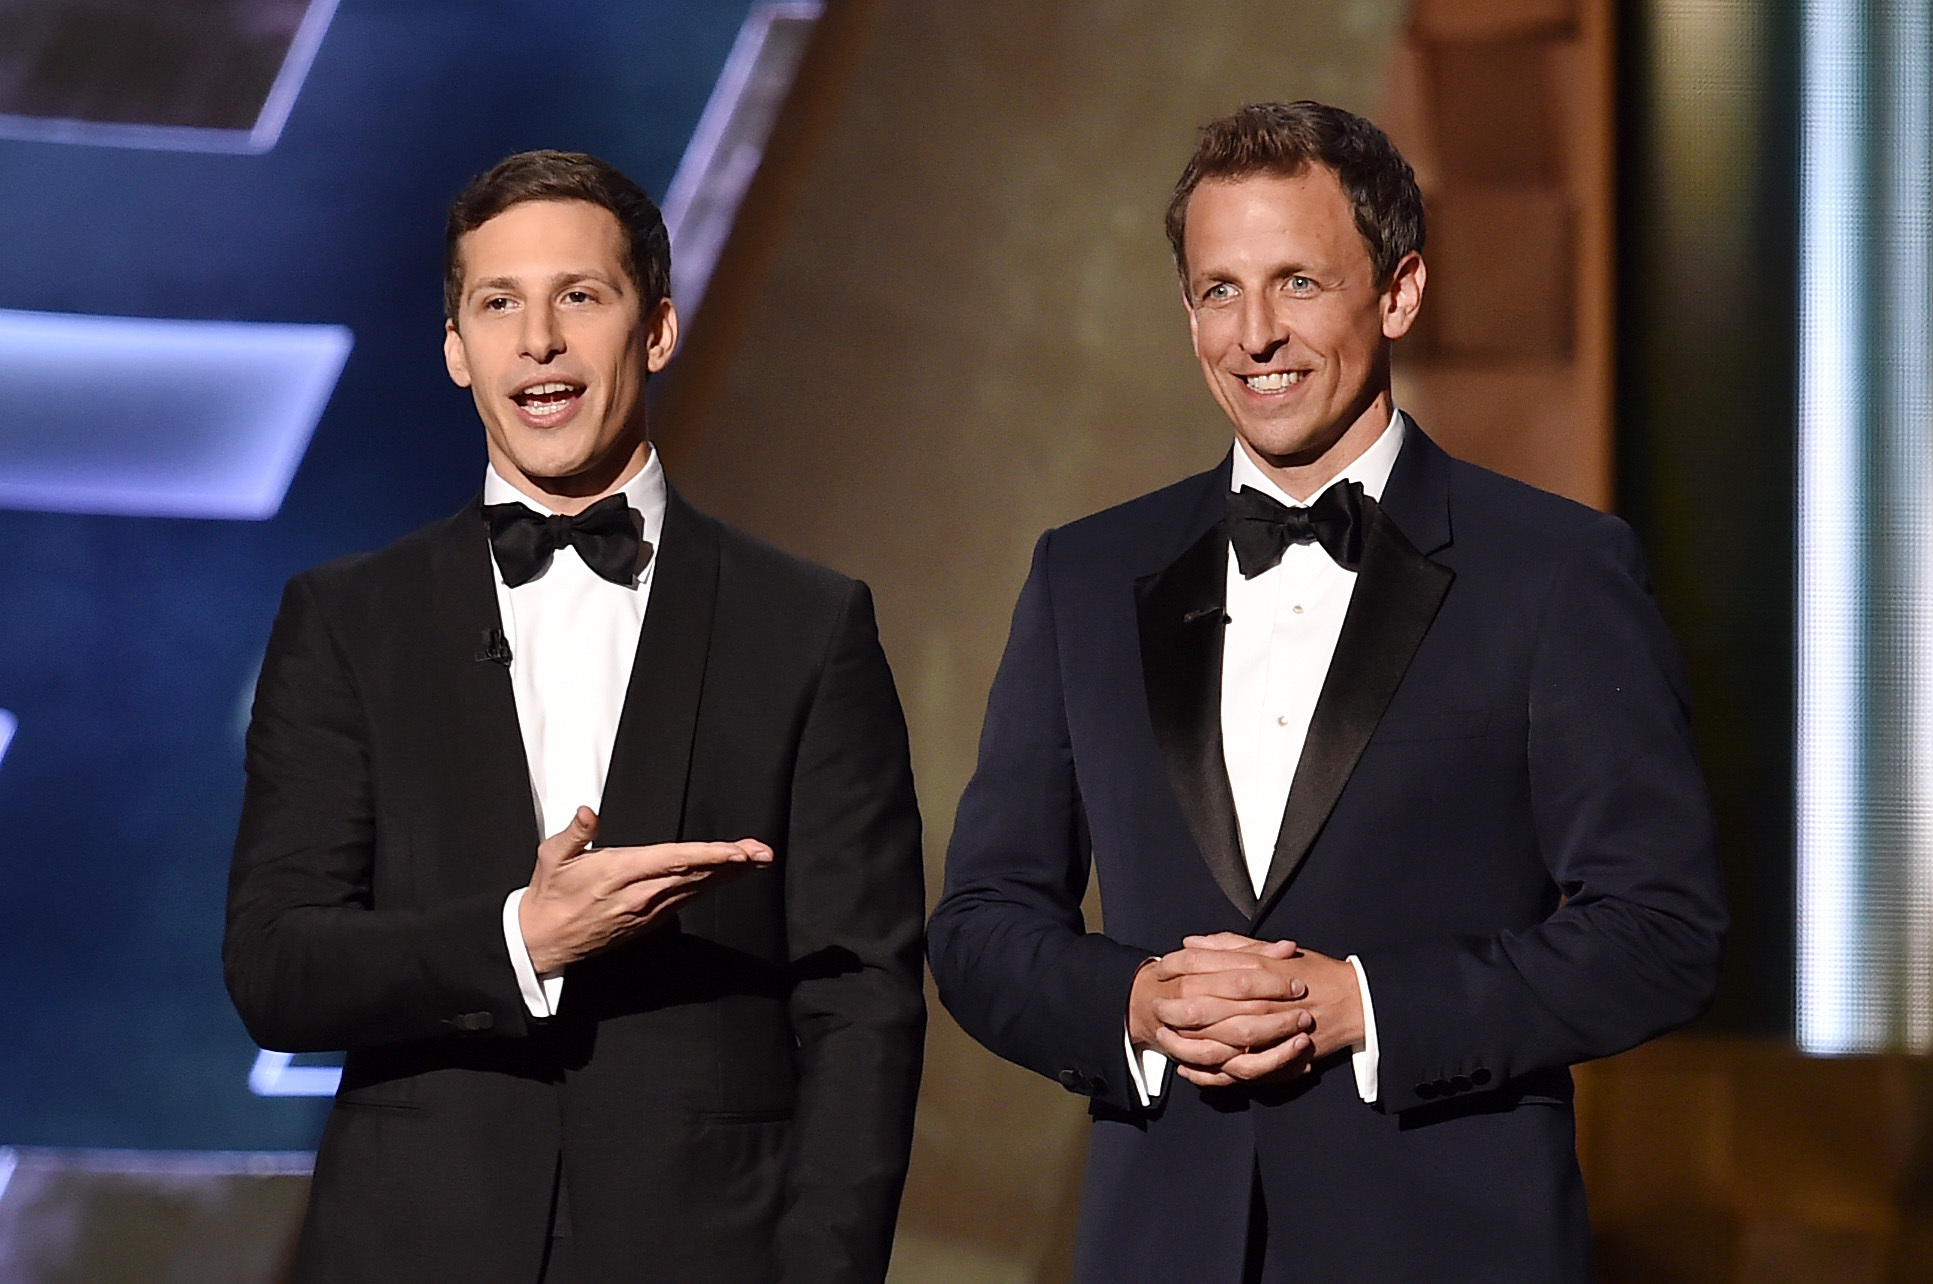 Seth Meyers and Andy Samberg at event of The 67th Primetime Emmy Awards (2015)